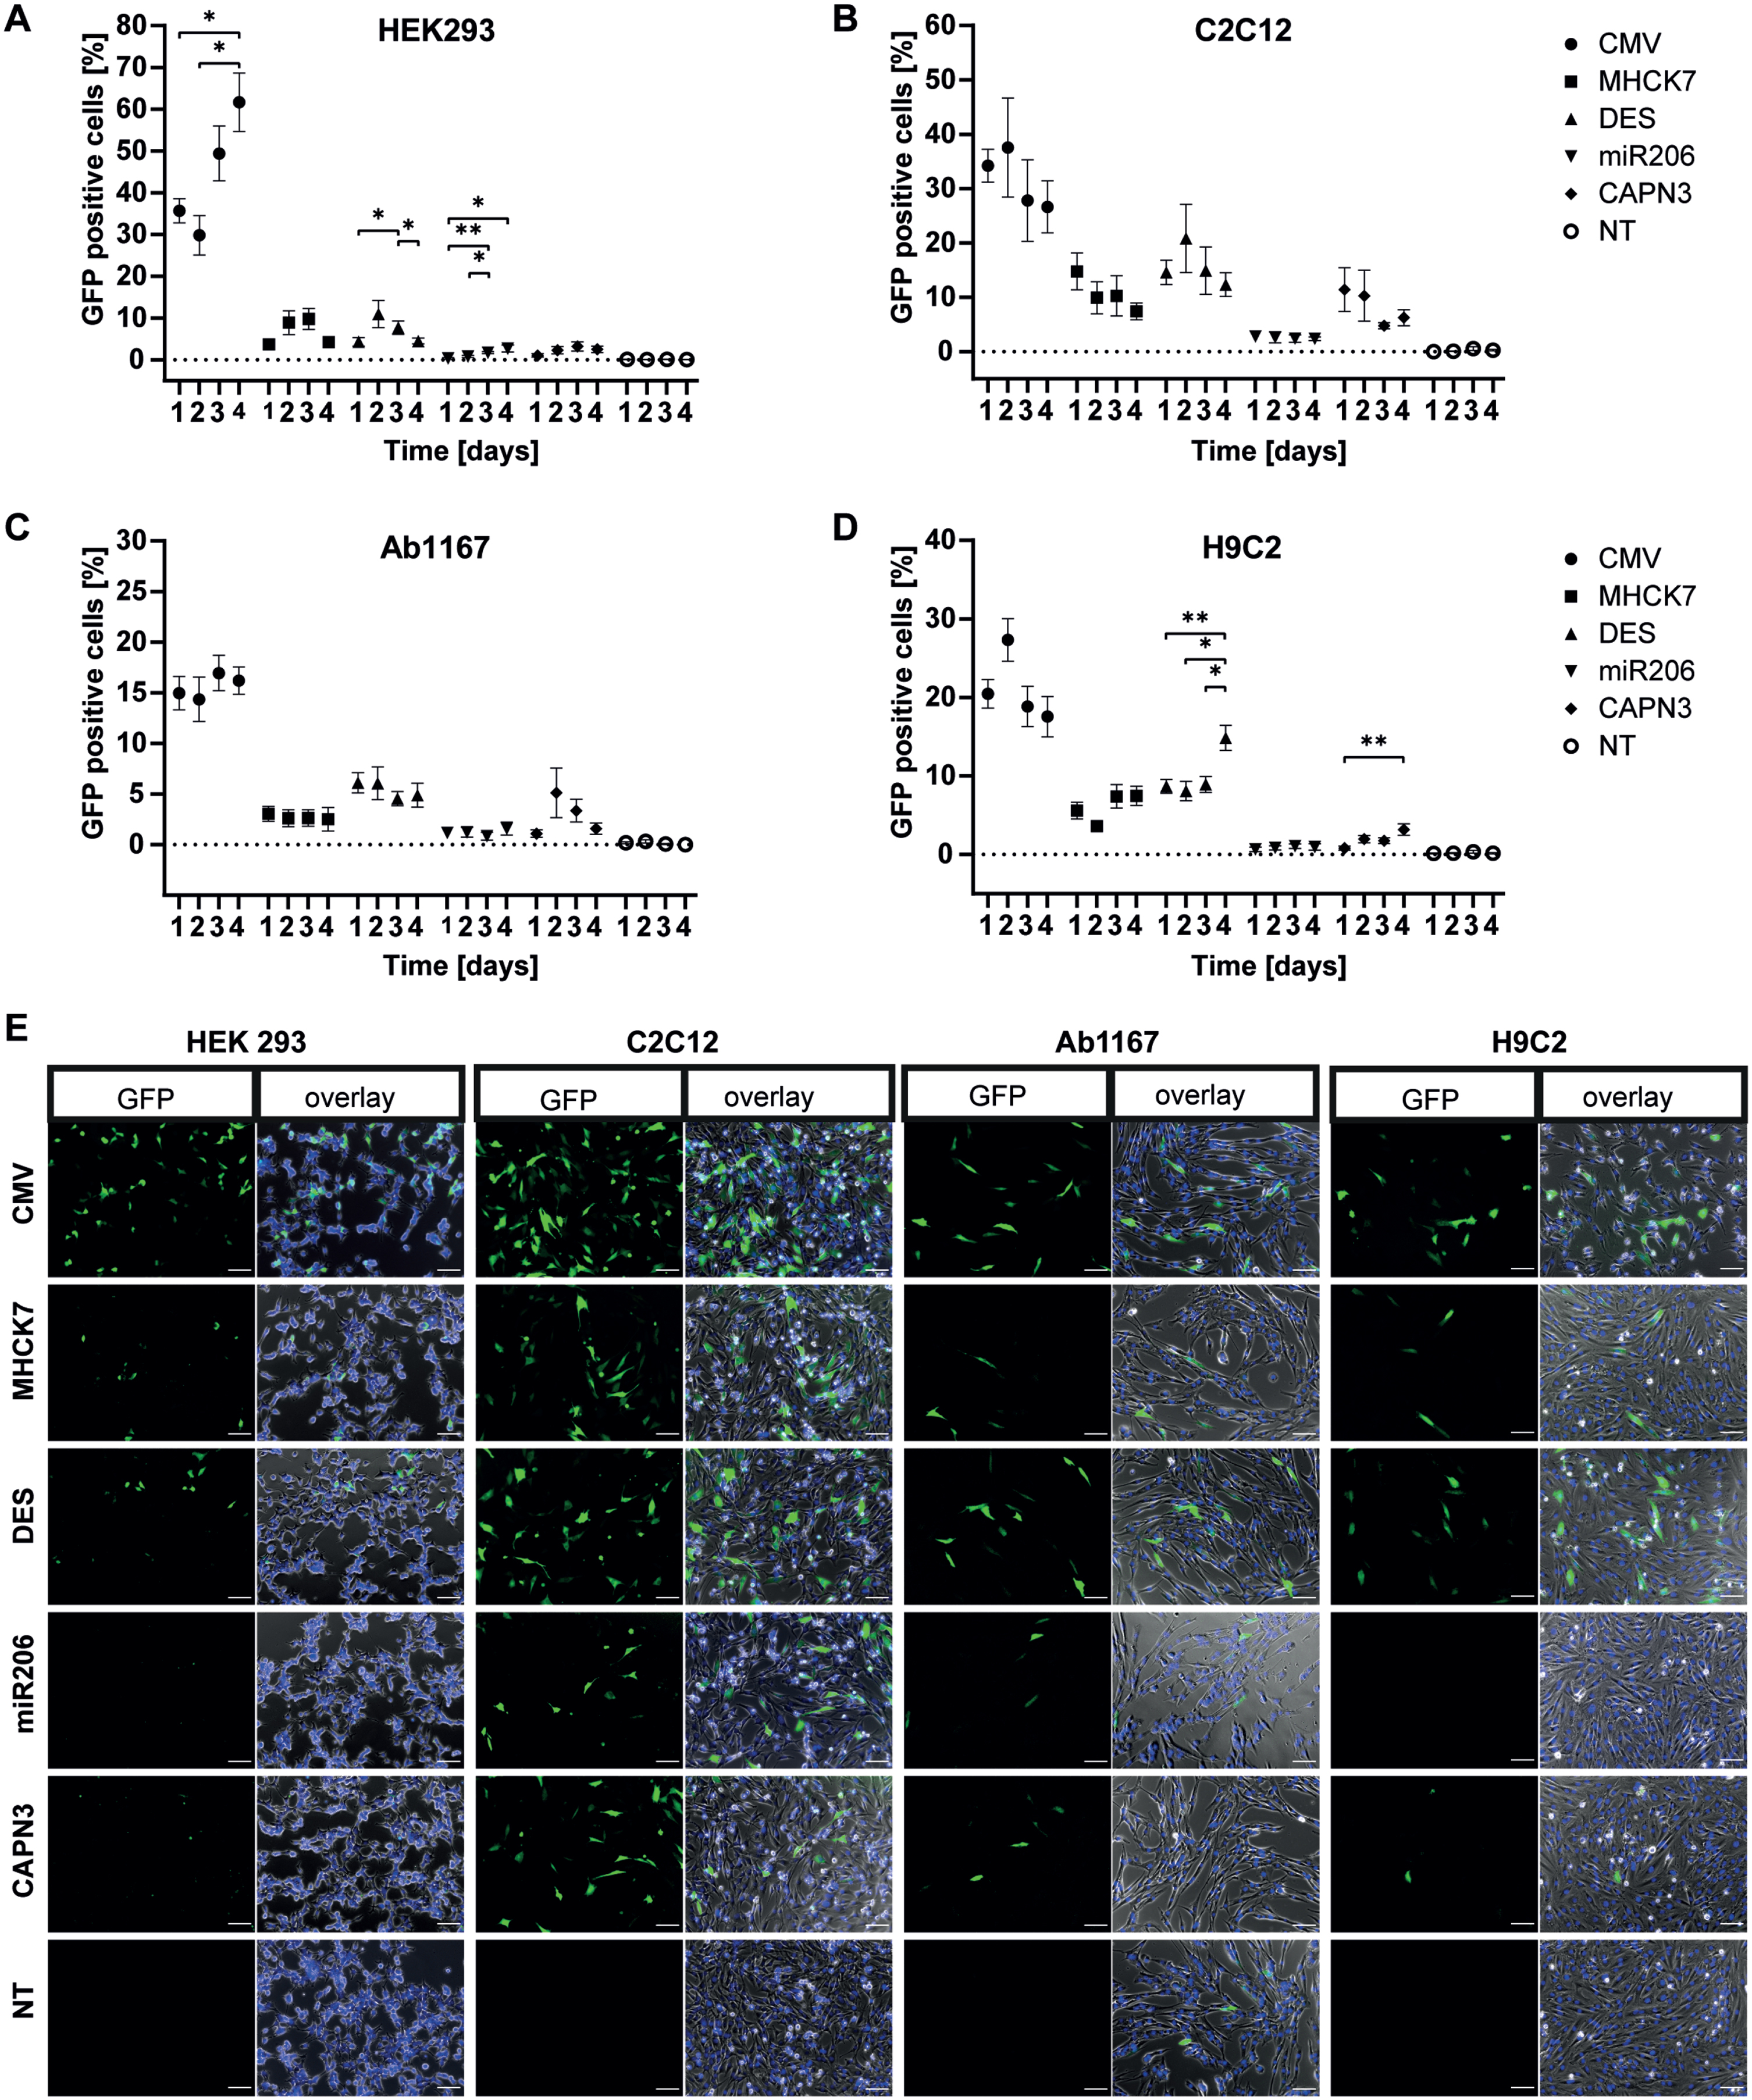 Promotor dependent GFP-expression in proliferating cells. Proliferating HEK293 (A), C2C12 (B), HSKM-Ab1167 (C) and H9C2 (D) were transfected with either CMV, MHCK7, DES, miR206 or CAPN3 promotor plasmids. Promotor activity was measured by GFP expression on four consecutive days. Percentage of GFP positive cells is given by number of GFP positive cells/total cell number. Datapoints represent mean values±SEMs (*p < 0.05; **p < 0.01; ***p < 0,001). (E) Representative overview of GFP expression in the given cell types under CMV, MHCK7, DES, miR206 and CAPN3 promotor at post transfection day 1. NT represents non GFP transfected controls, cells were transfected with equal amounts of puc19 spike plasmid. Left panel in each cell type column shows the GFP signal (green) only and right panel shows an overlay of GFP positive cells (green), Hoechst stained nuclei (blue) and whole cells in phase contrast (grey). Scale bar = 100μm.